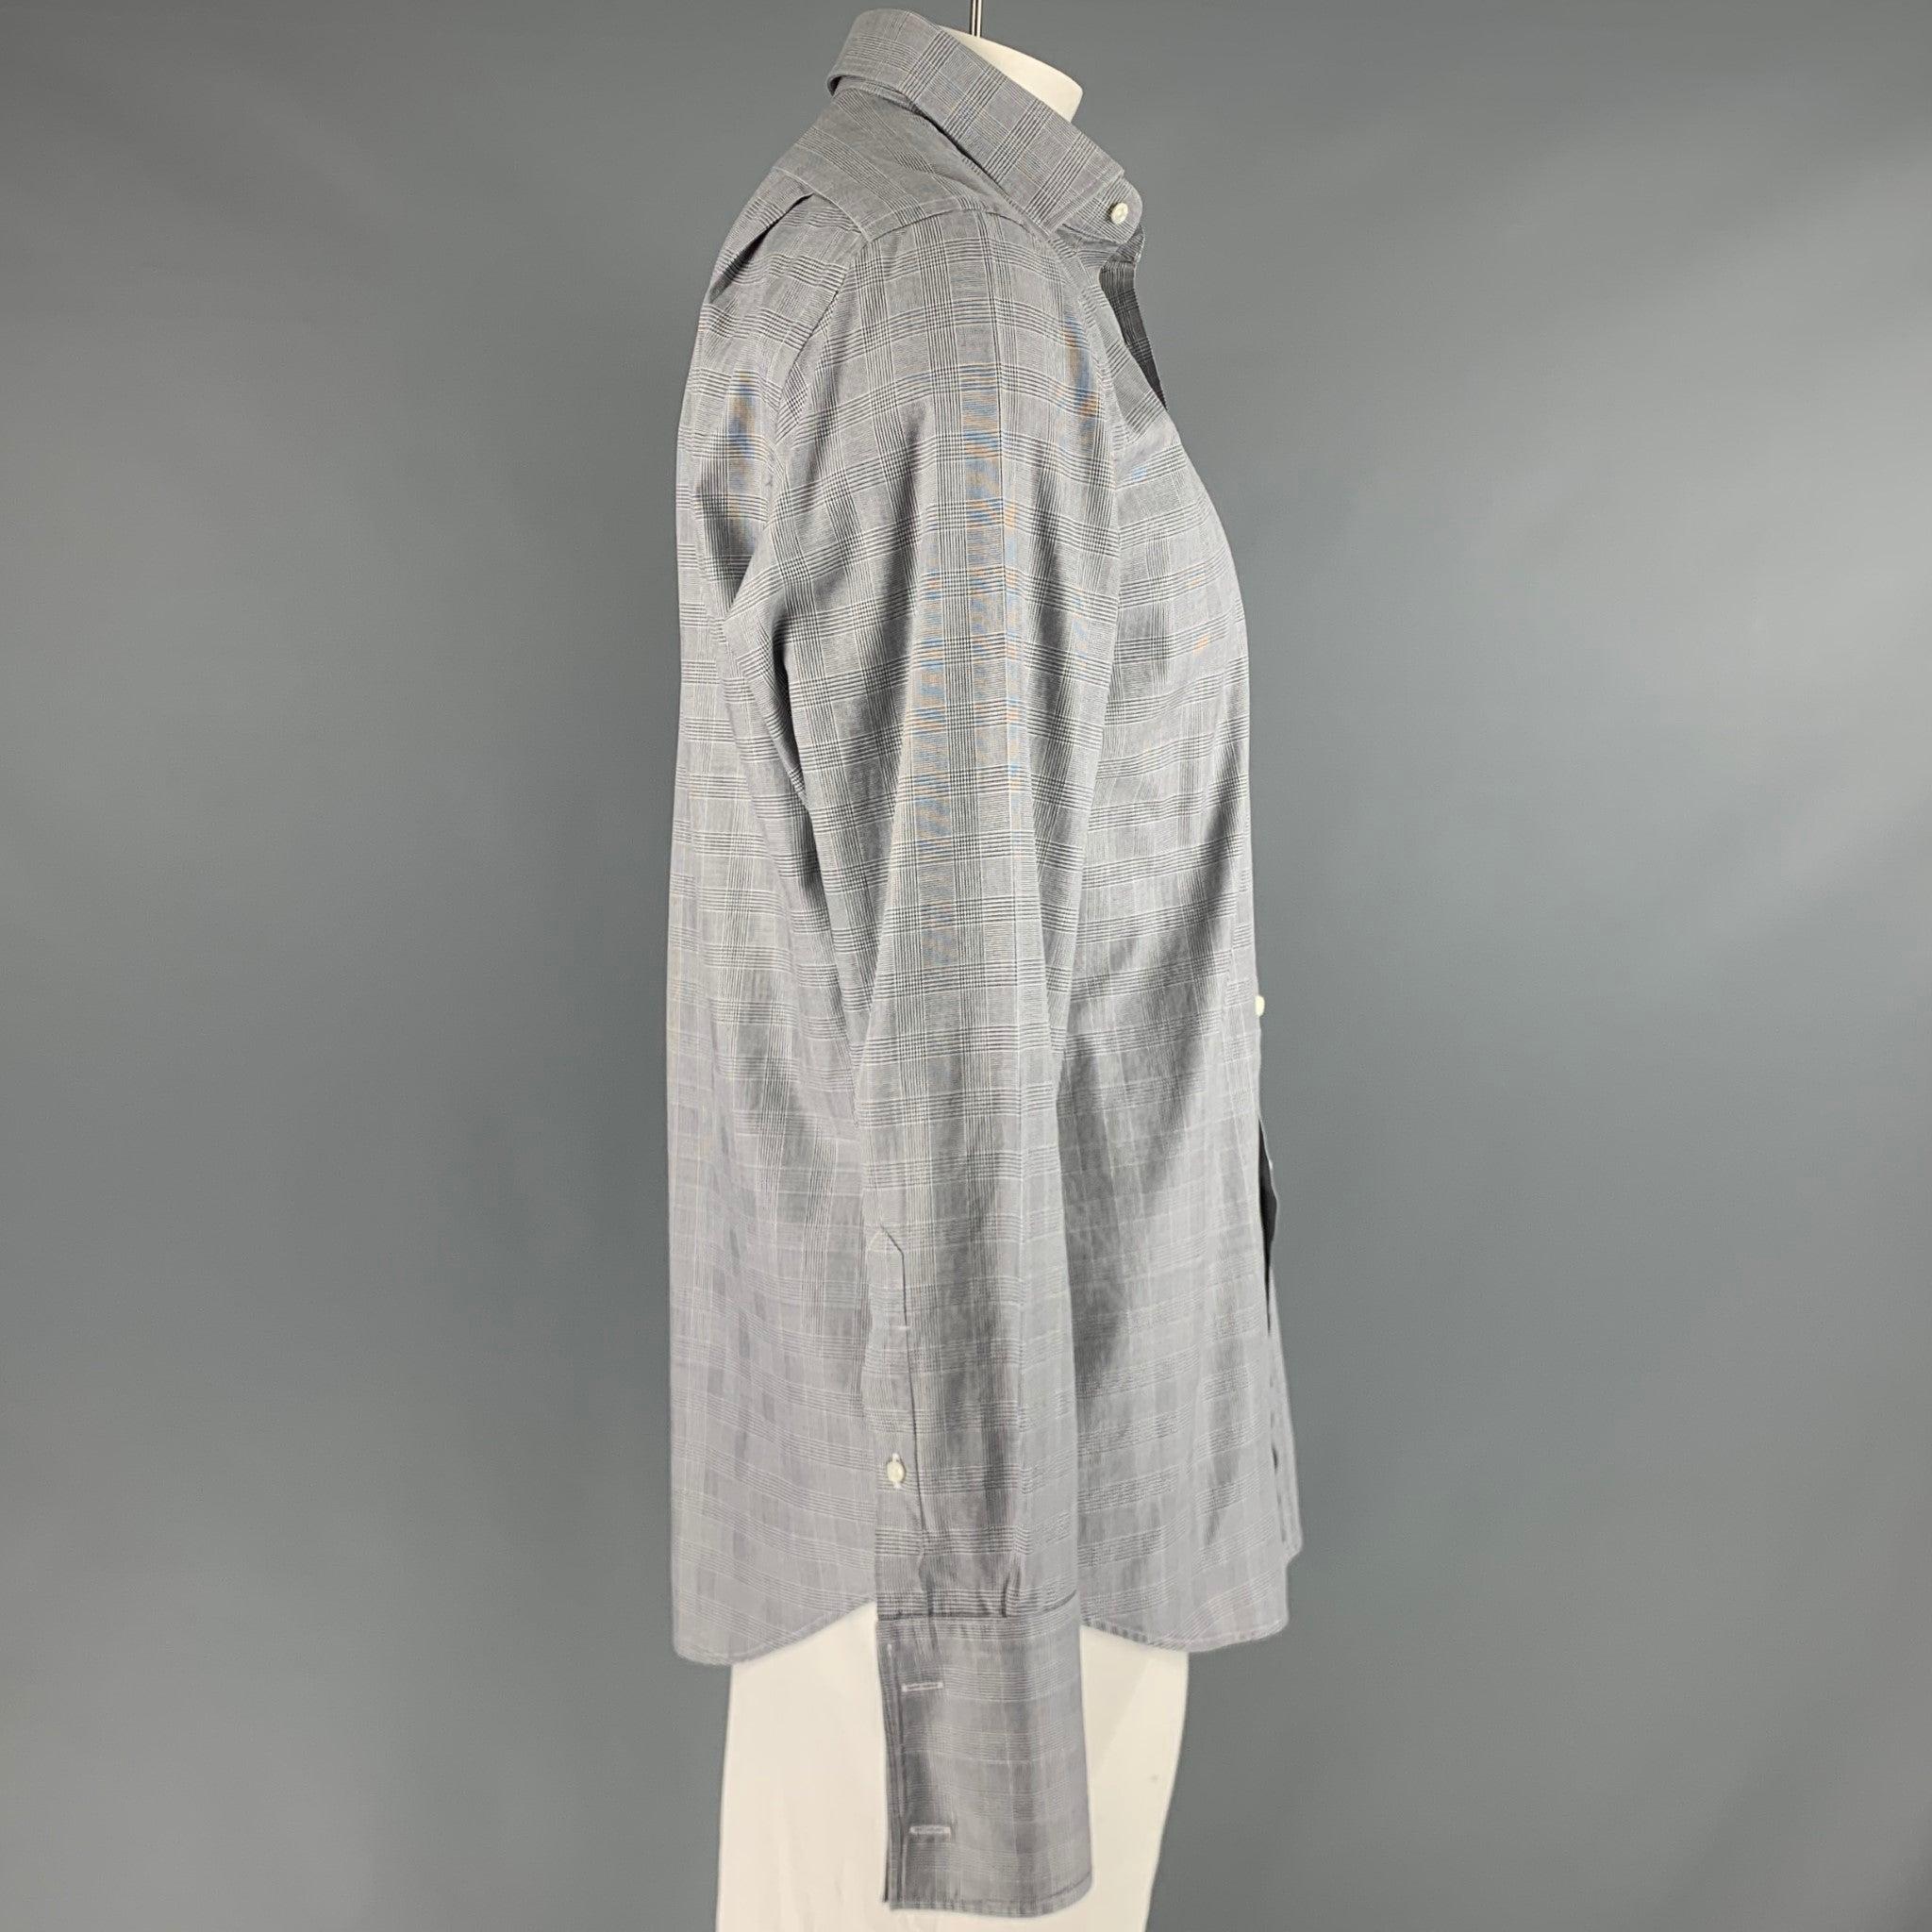 RALPH LAUREN BLACK LABEL long sleeve shirt
in a grey cotton weave featuring plaid pattern, French cuffs, and button closure. Cufflinks not included. Made in Italy.Very Good Pre-Owned Condition. Minor marks. 

Marked:   16.5 

Measurements: 
